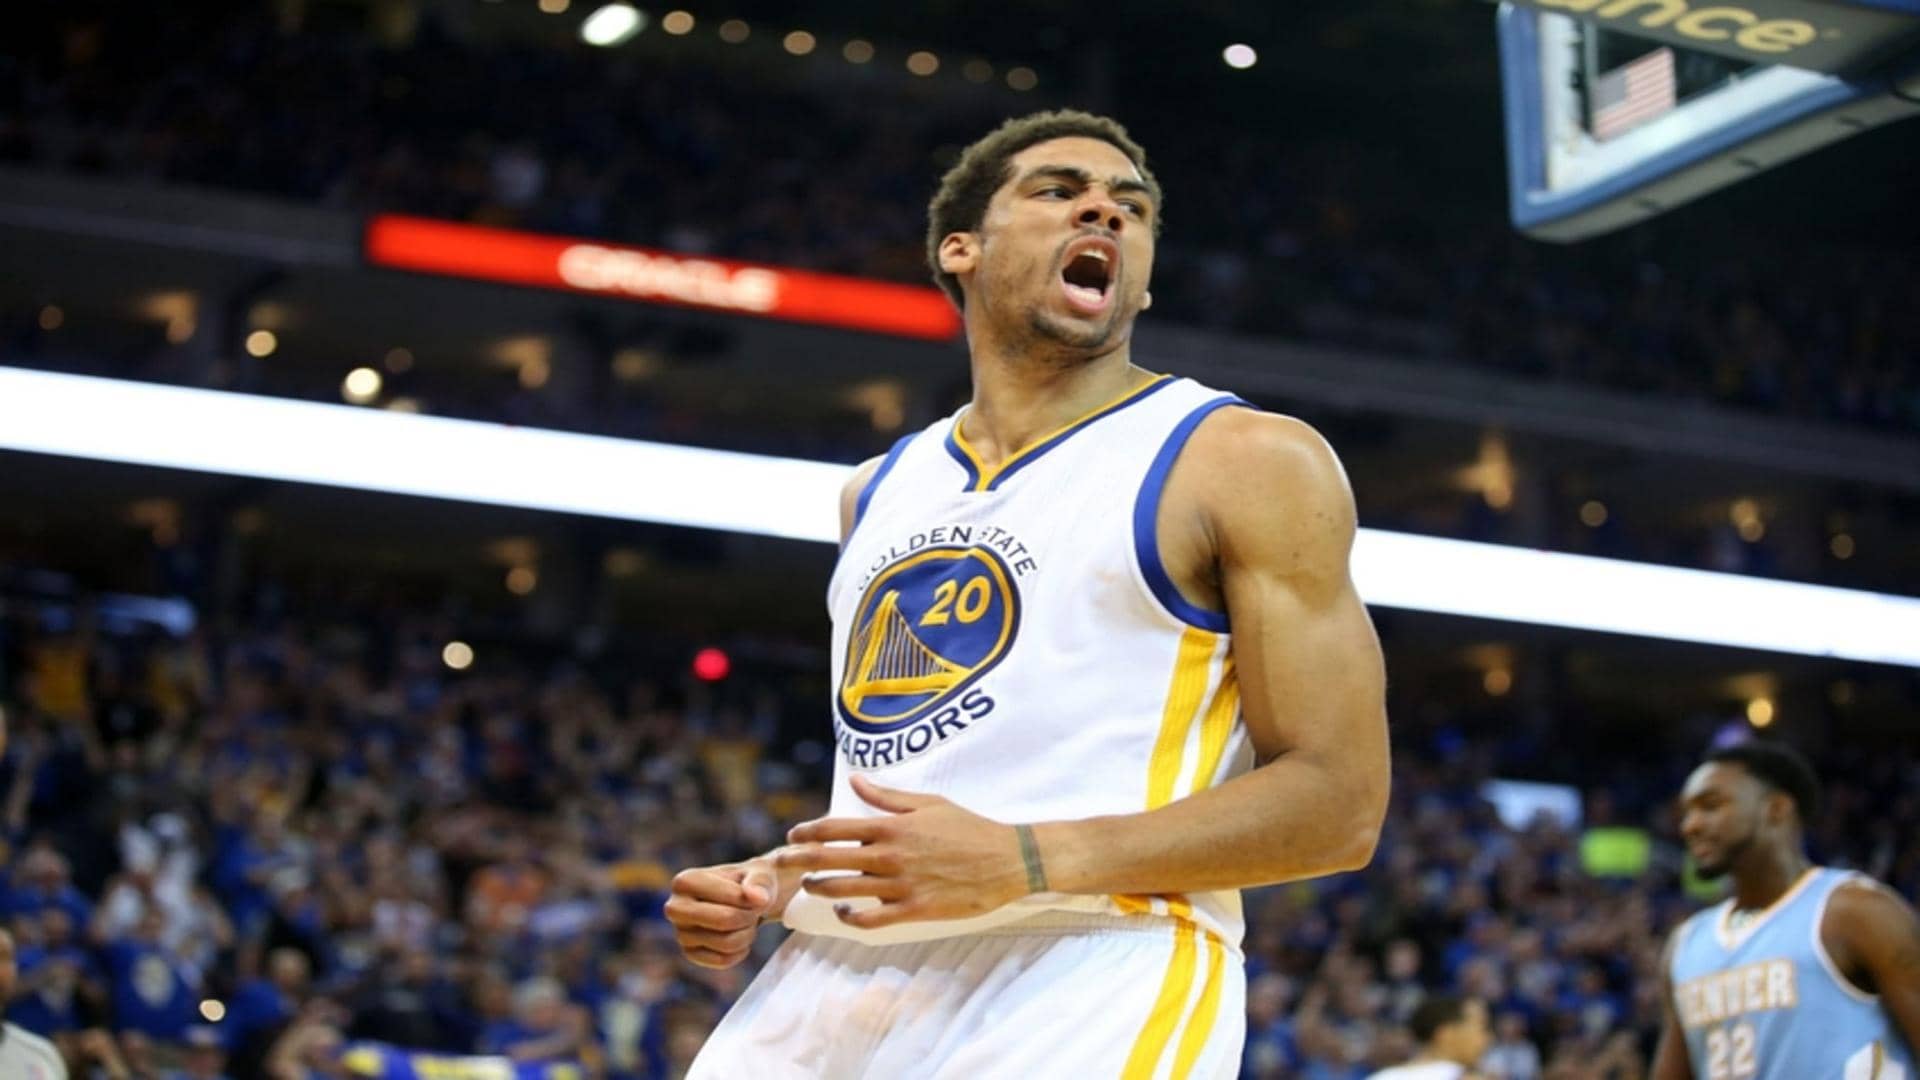 James Michael McAdoo - Youngest Player To Win NBA championship